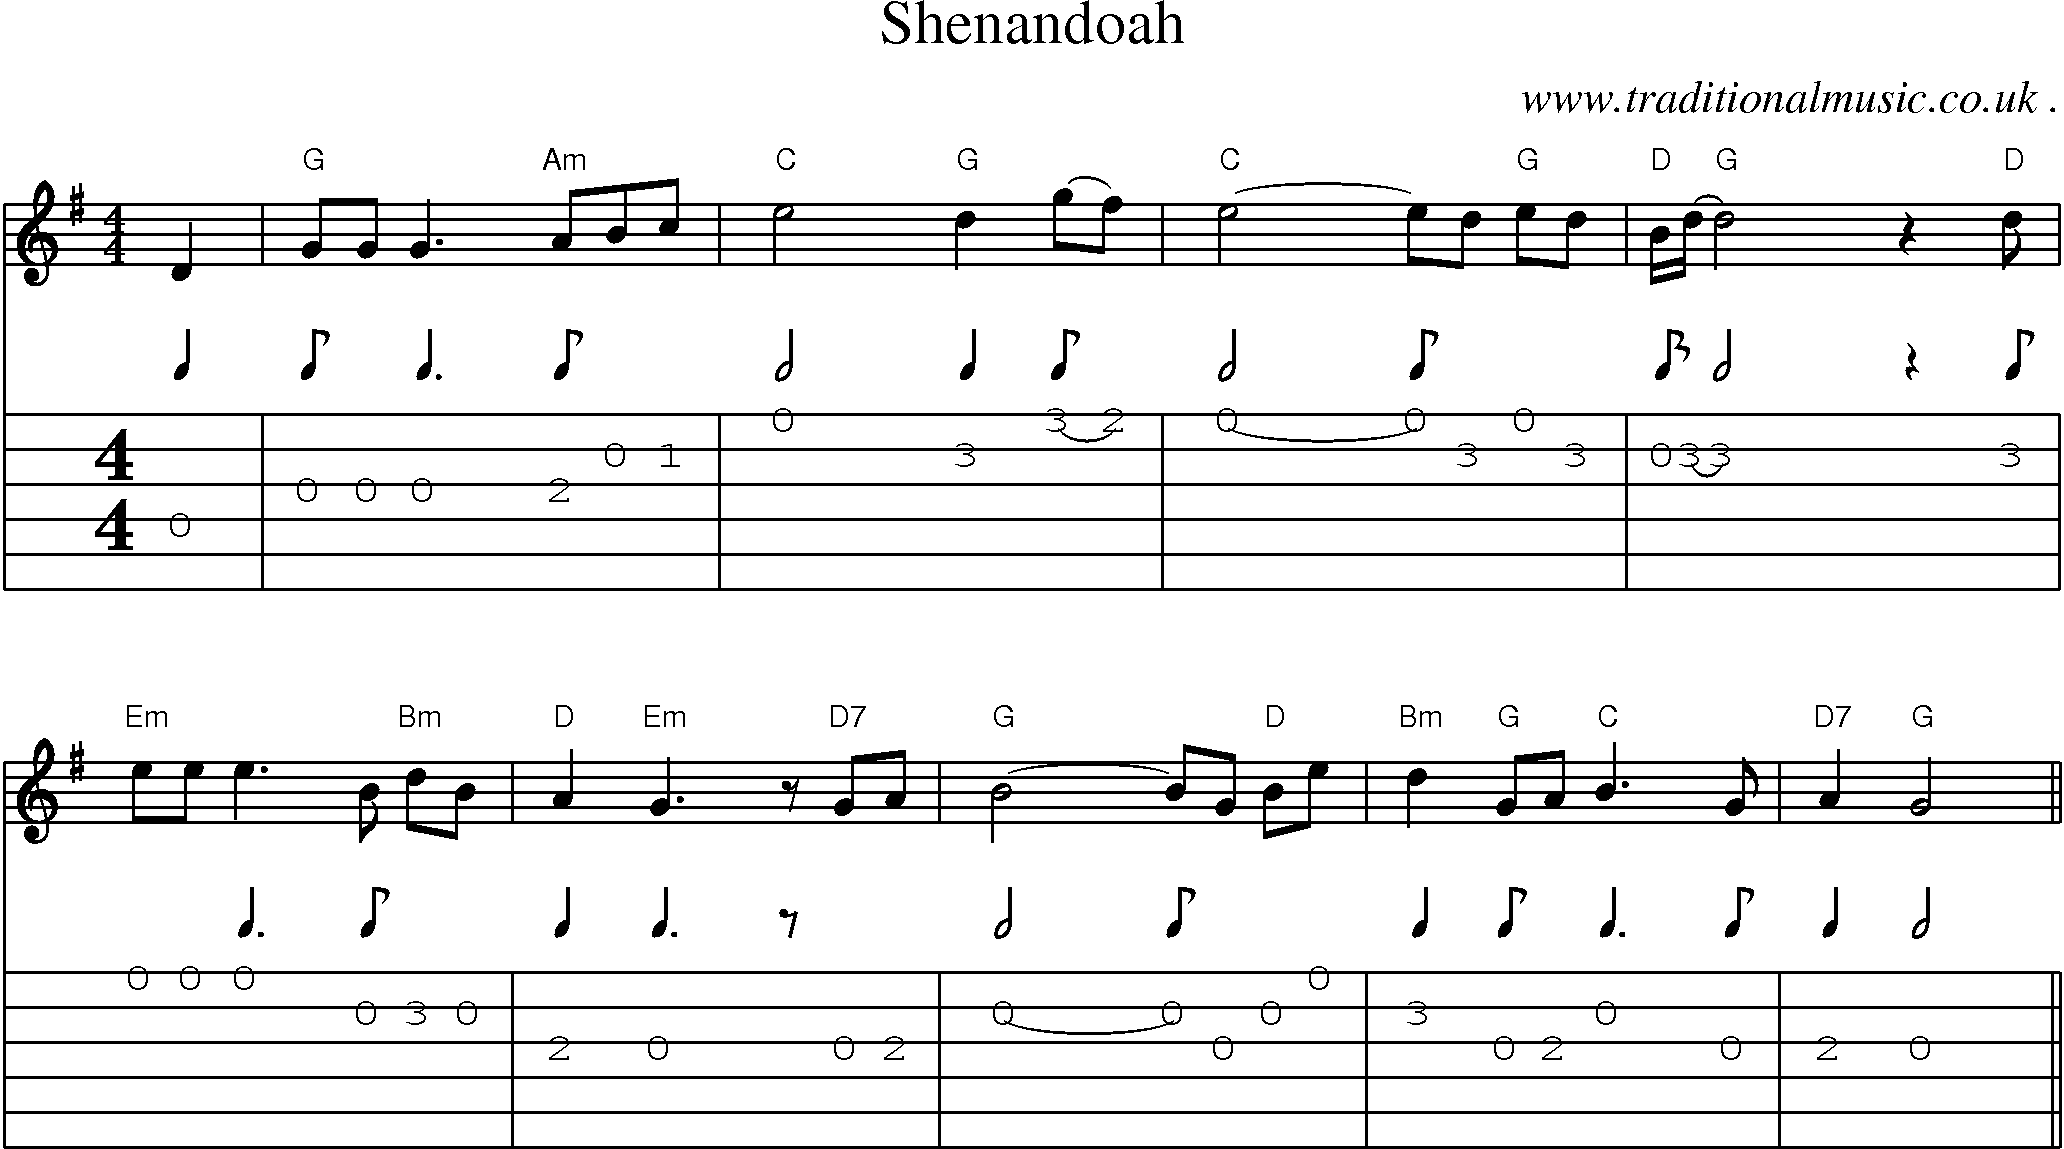 Music Score and Guitar Tabs for Shenandoah